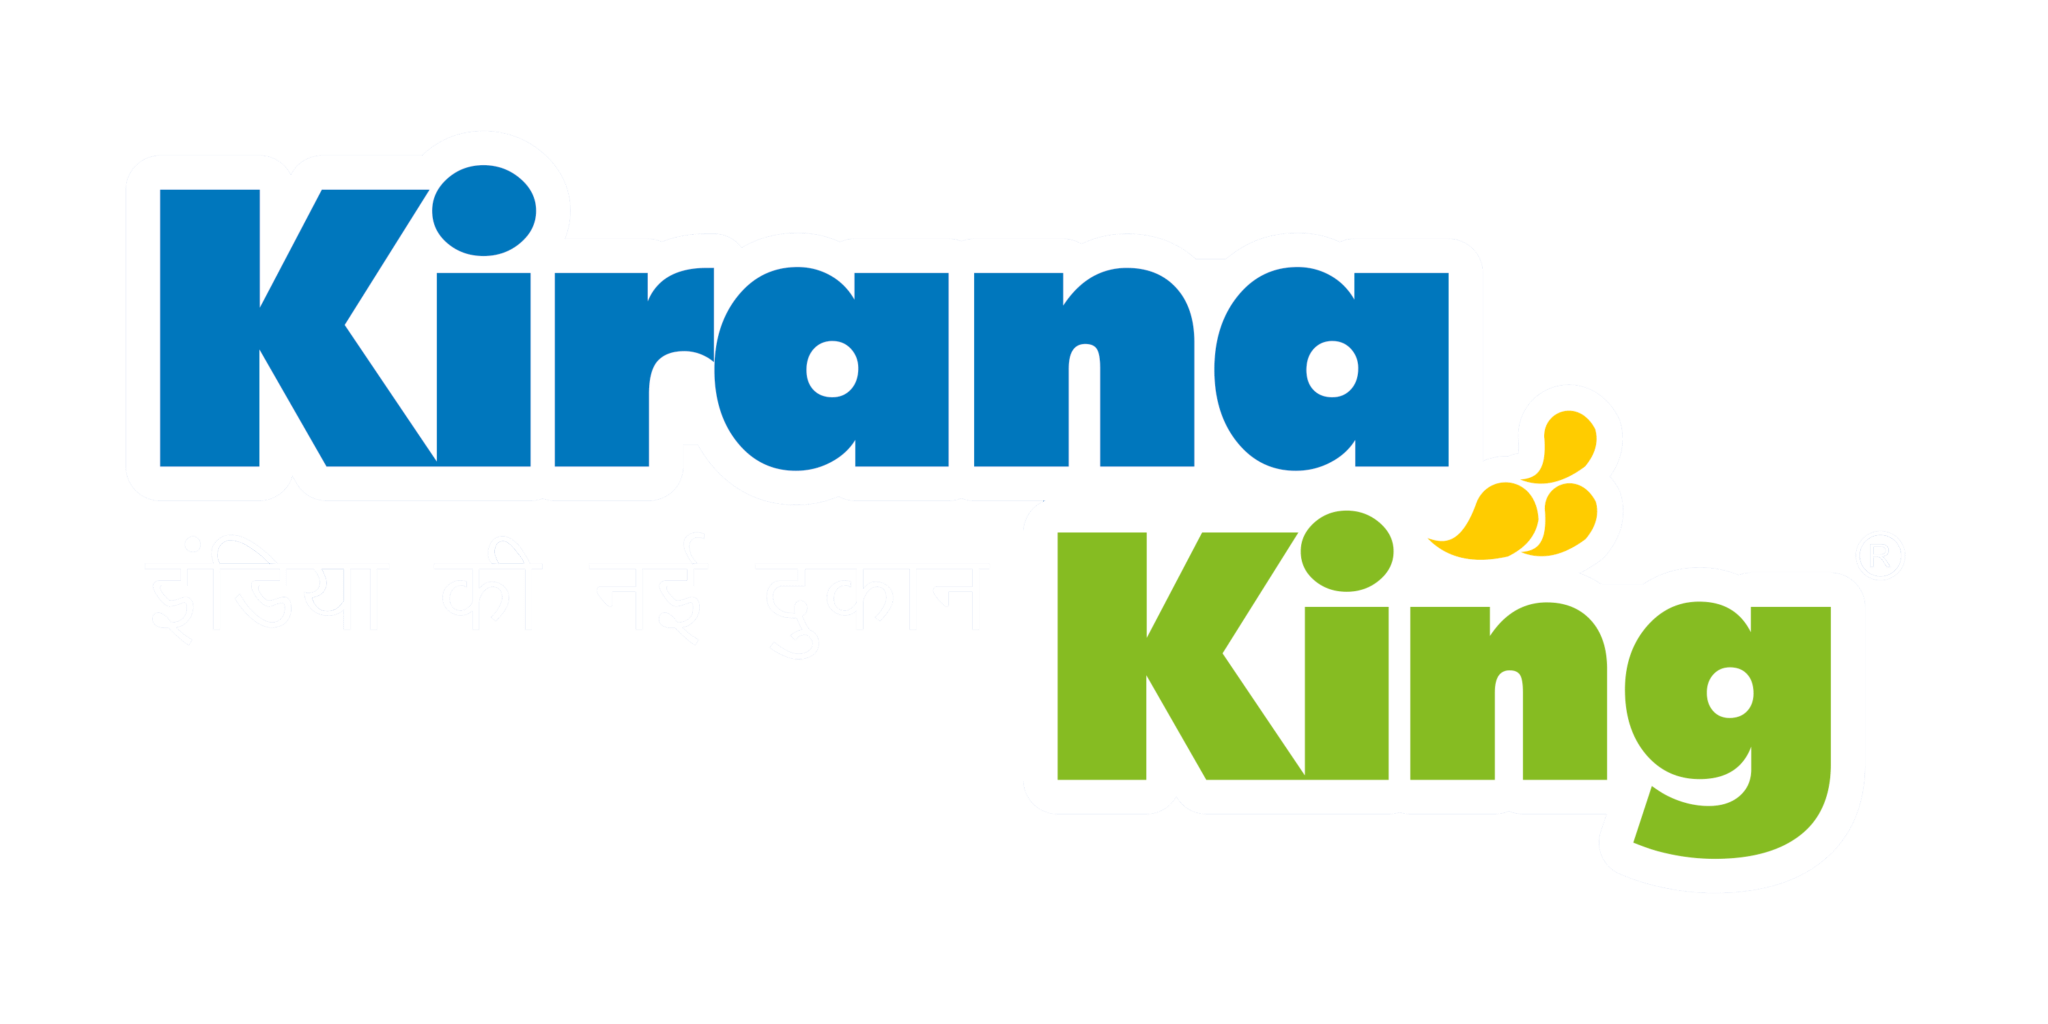 jaipur-based-startup-kirana-king-aims-to-create-7000-stores-in-14-cities-in-the-coming-five-years